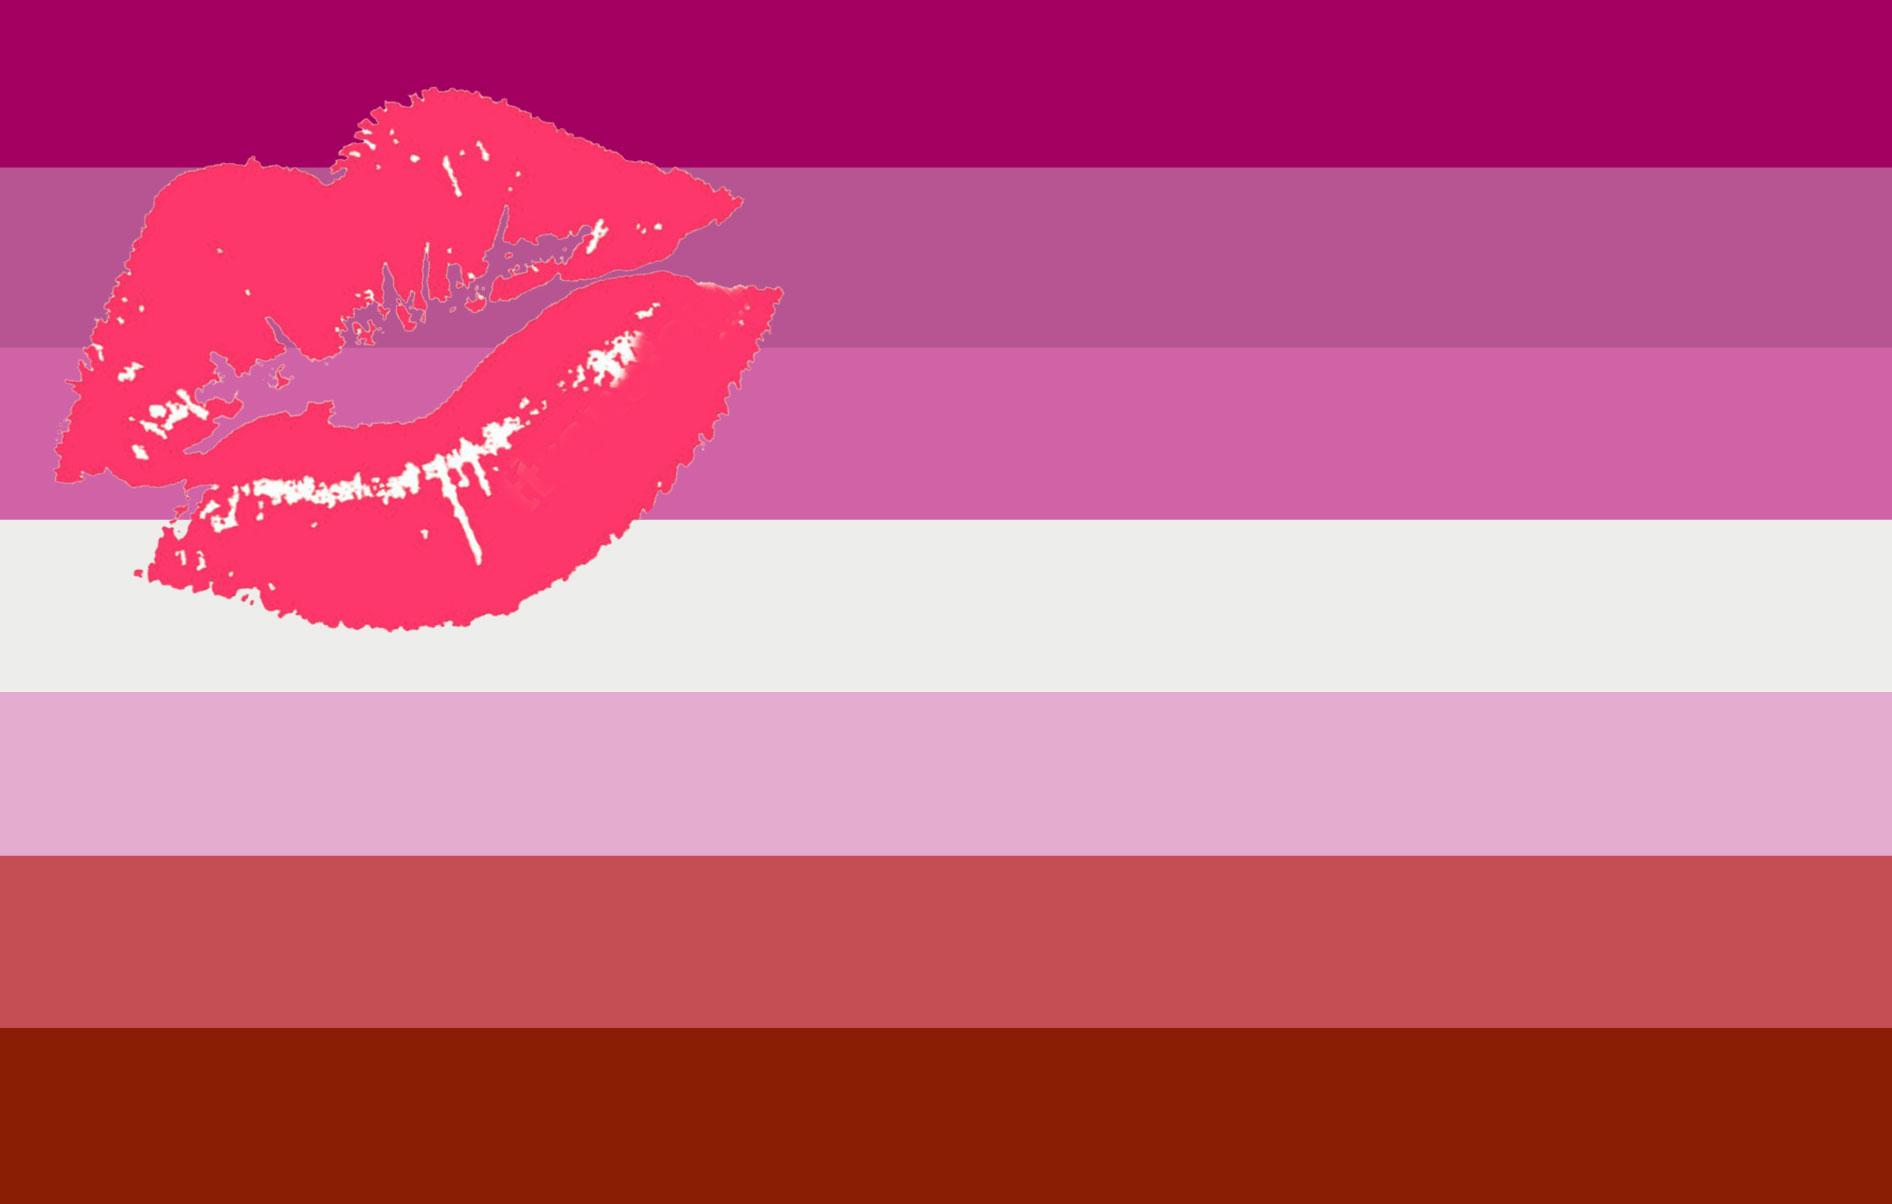 Details about LGBTQ Lipstick Lesbian Pride Flag 3' X 5' With Grom...